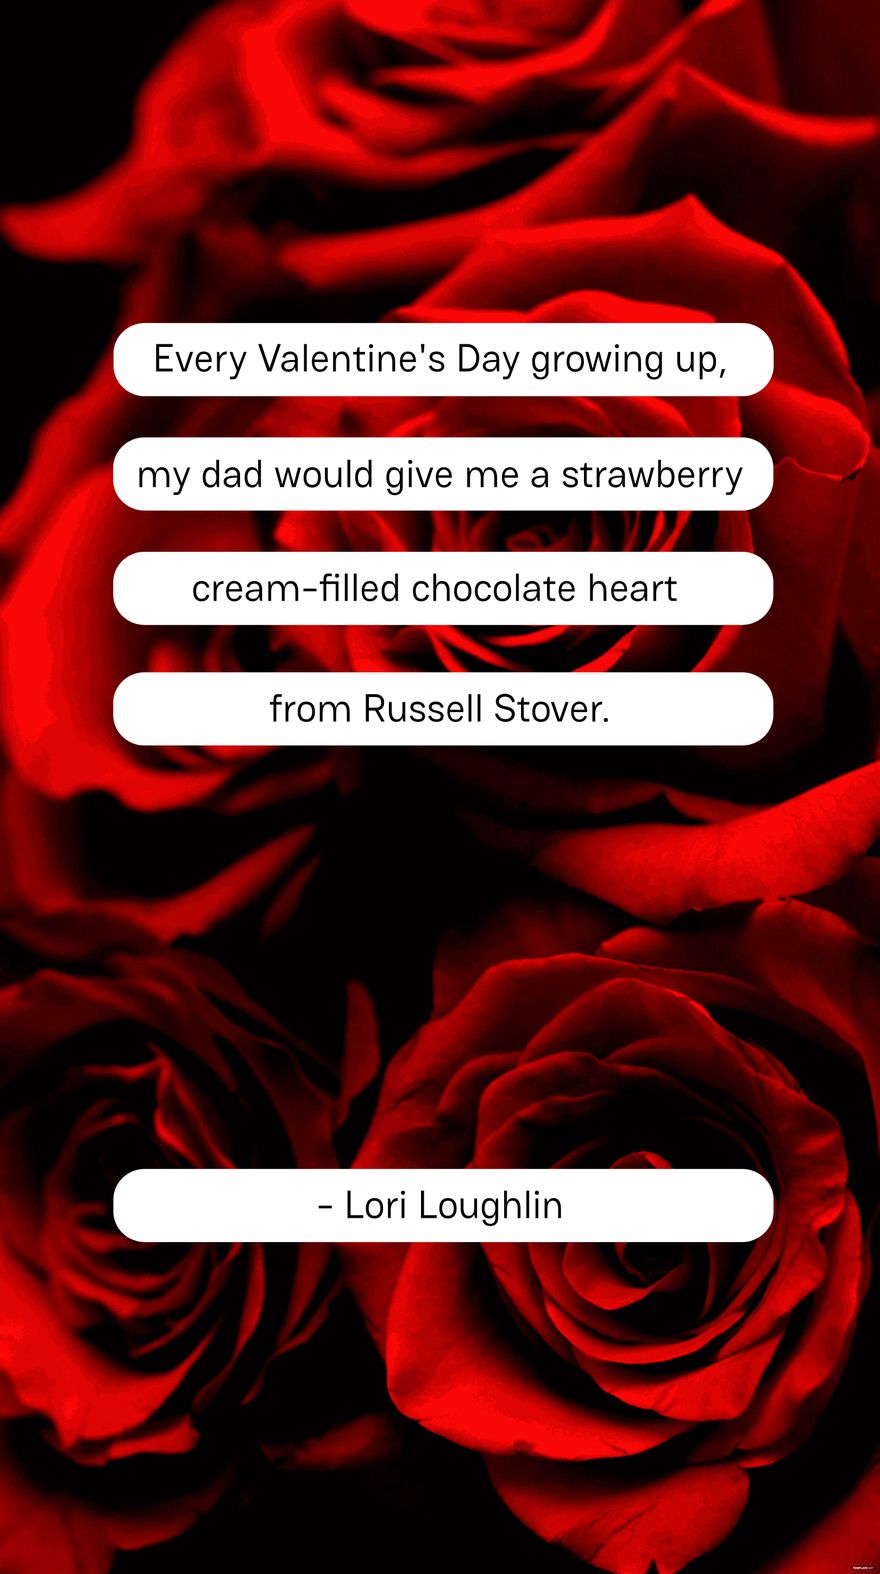 Lori Loughlin - Every Valentine's Day growing up, my dad would give me a strawberry cream-filled chocolate heart from Russell Stover.